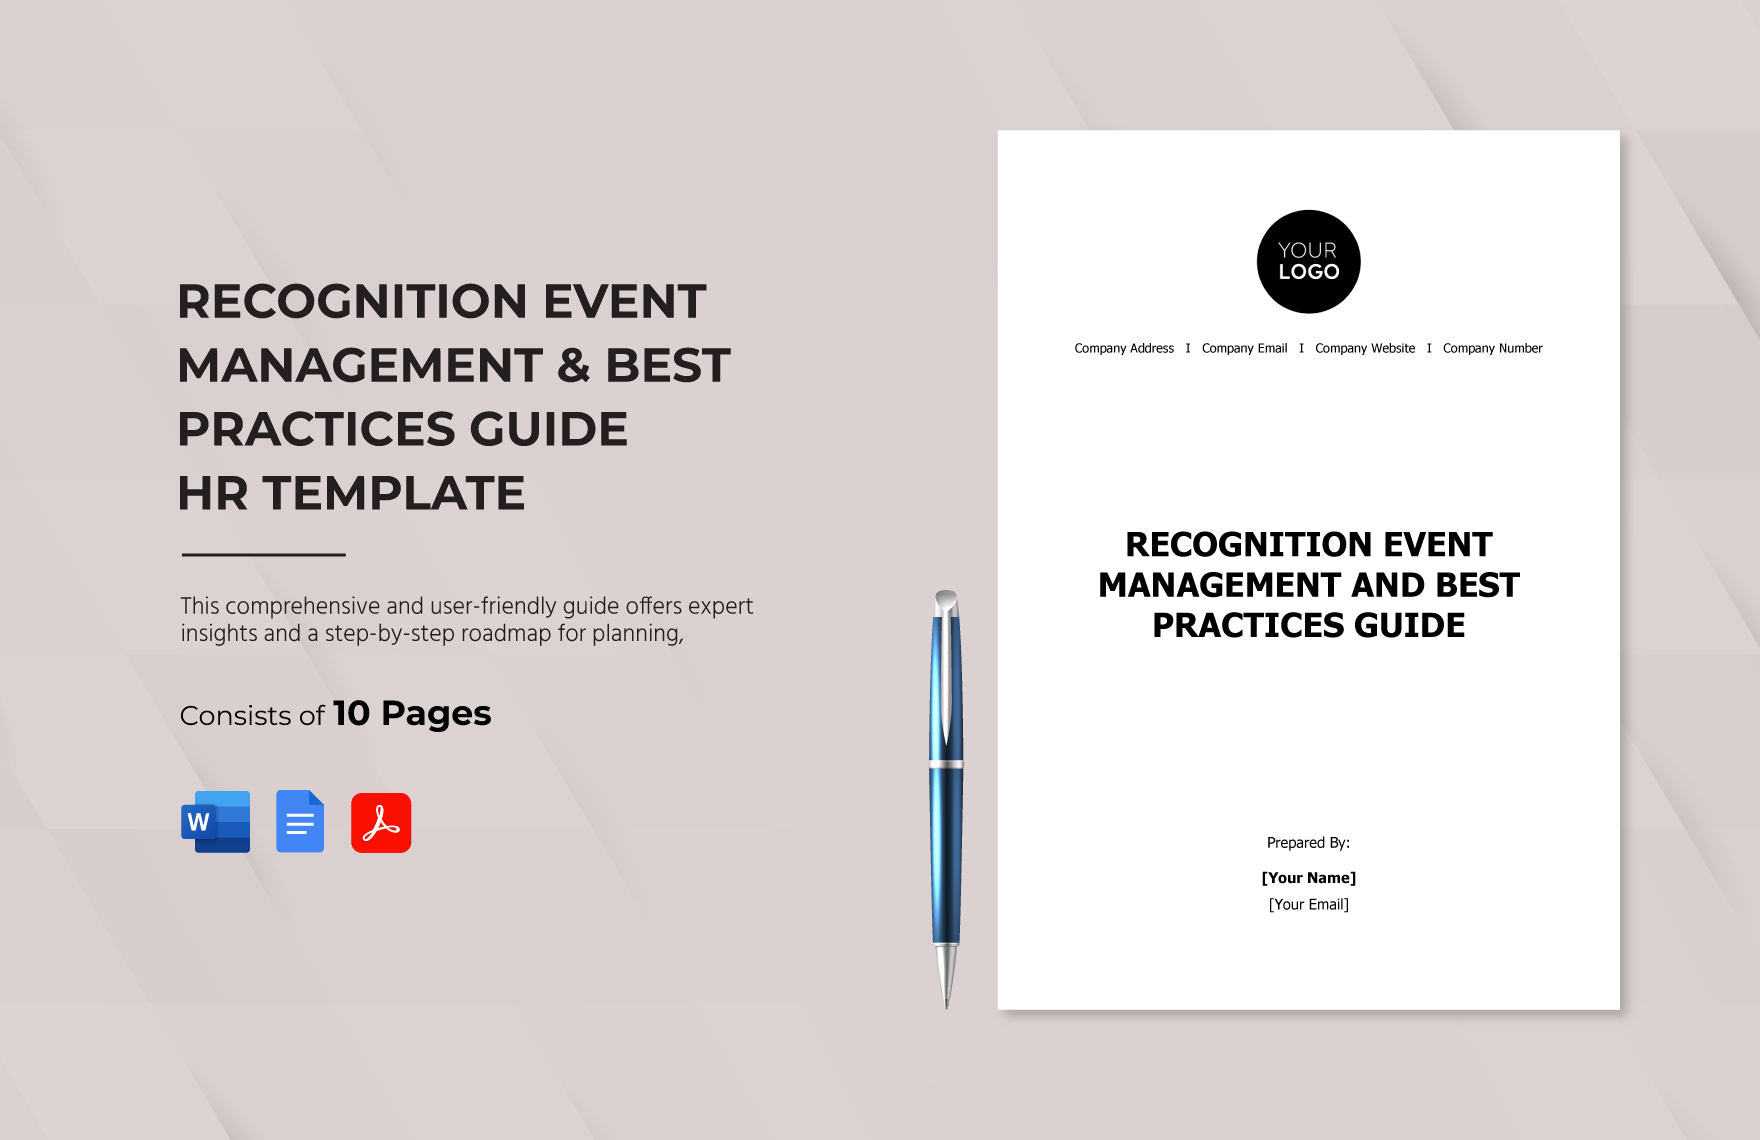 Recognition Event Management and Best Practices Guide HR Template